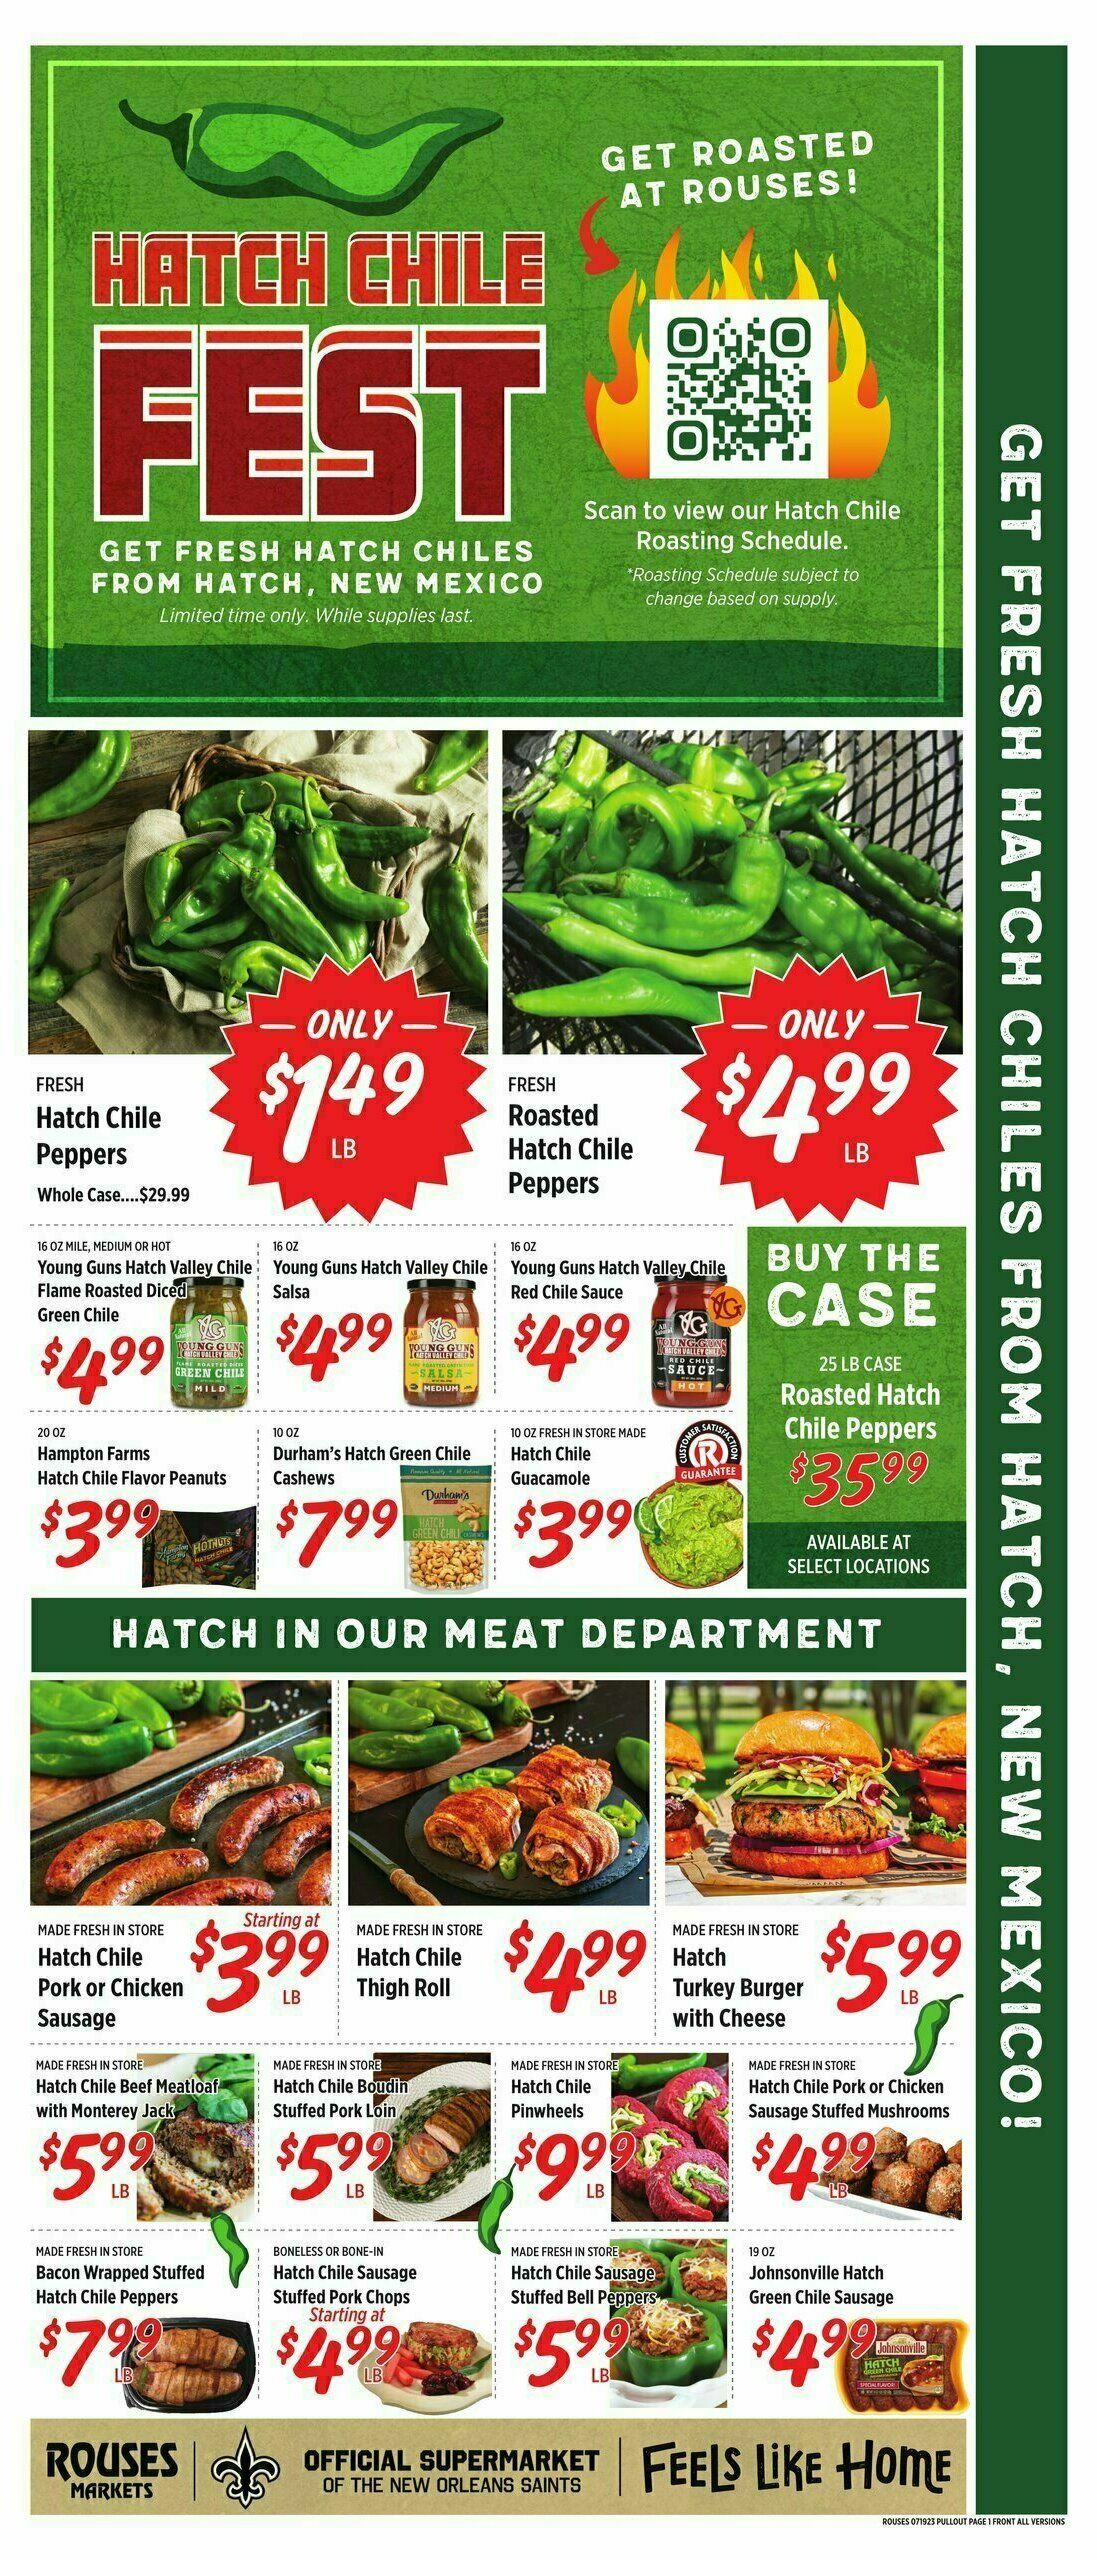 Rouses Markets Weekly Ad from July 19